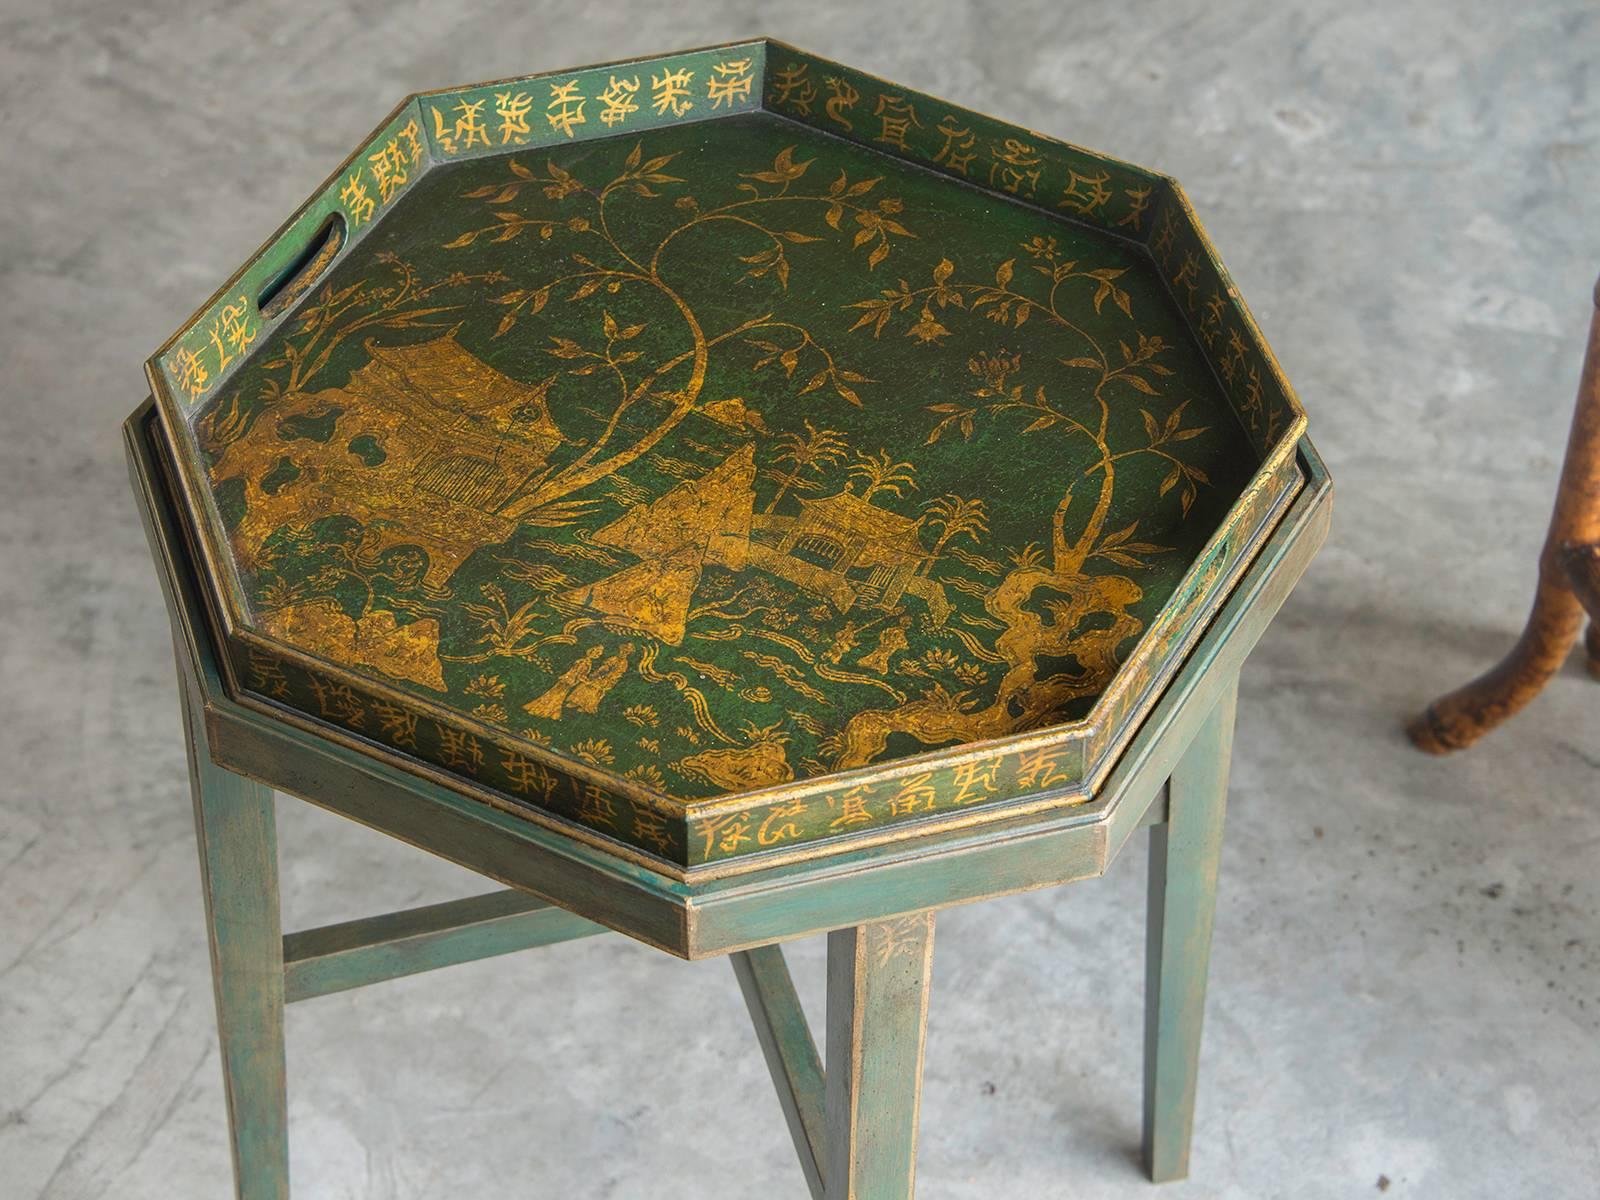 Be the first to see our new selections direct from 1stdibs! Please click on follow below. 

A rare and unique painted wood antique English tray coffee table of octagon shape embellished with a different gilded chinoiserie design from the Edwardian